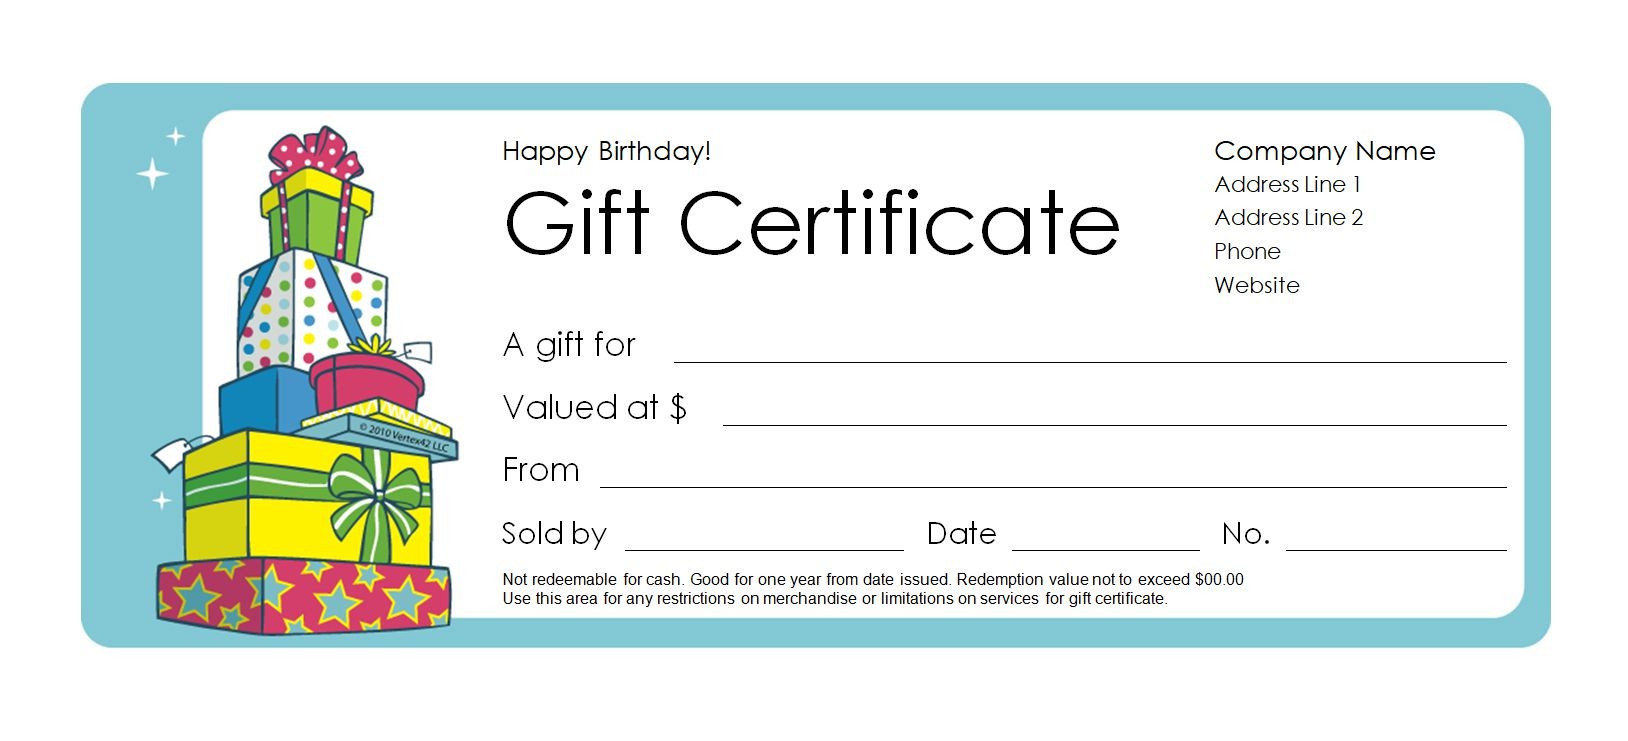 173 Free Gift Certificate Templates You Can Customize Fake Voucher Maker